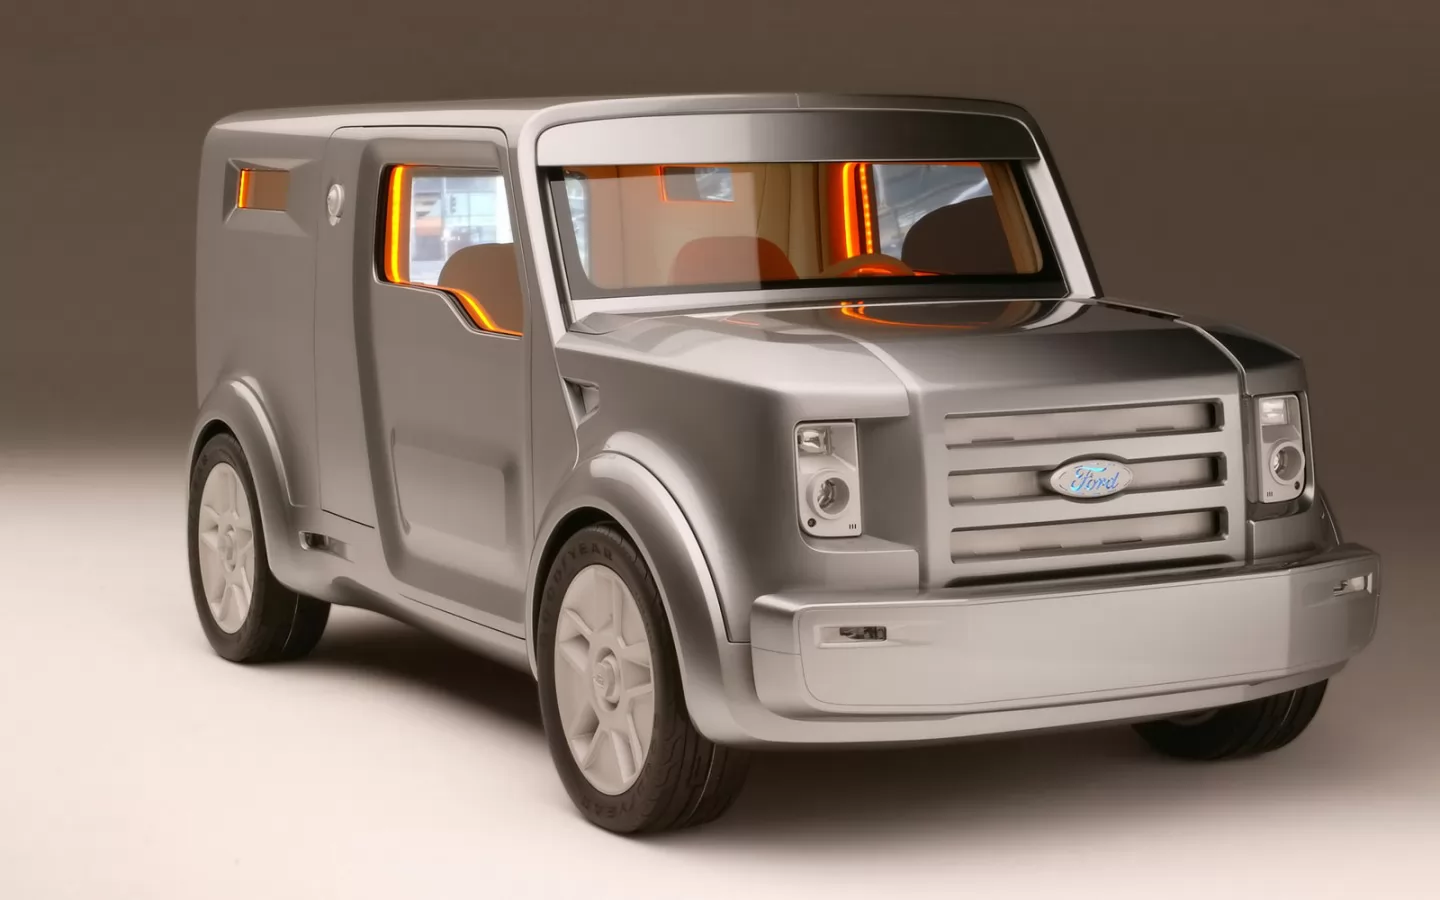  Ford Synus-Concept, Ford, , , , ,  